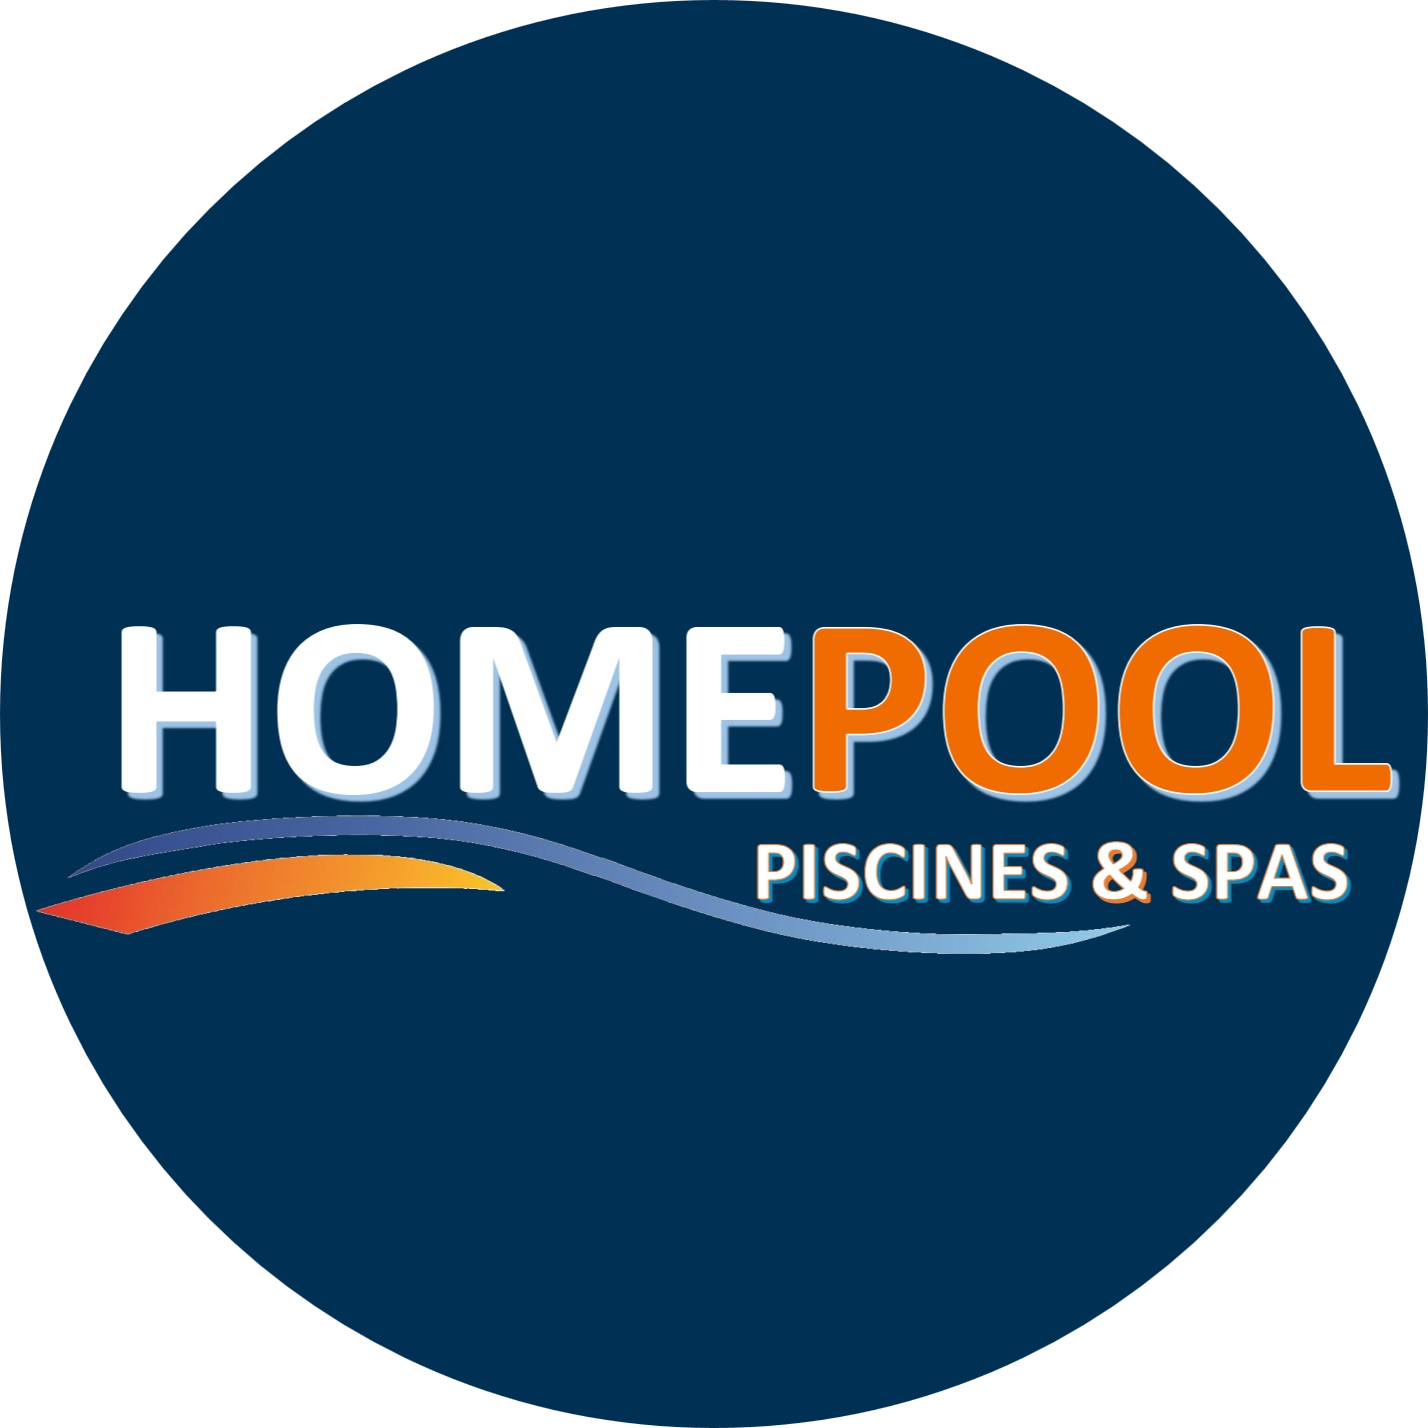 HOME POOL Piscines Magiline Toulouse